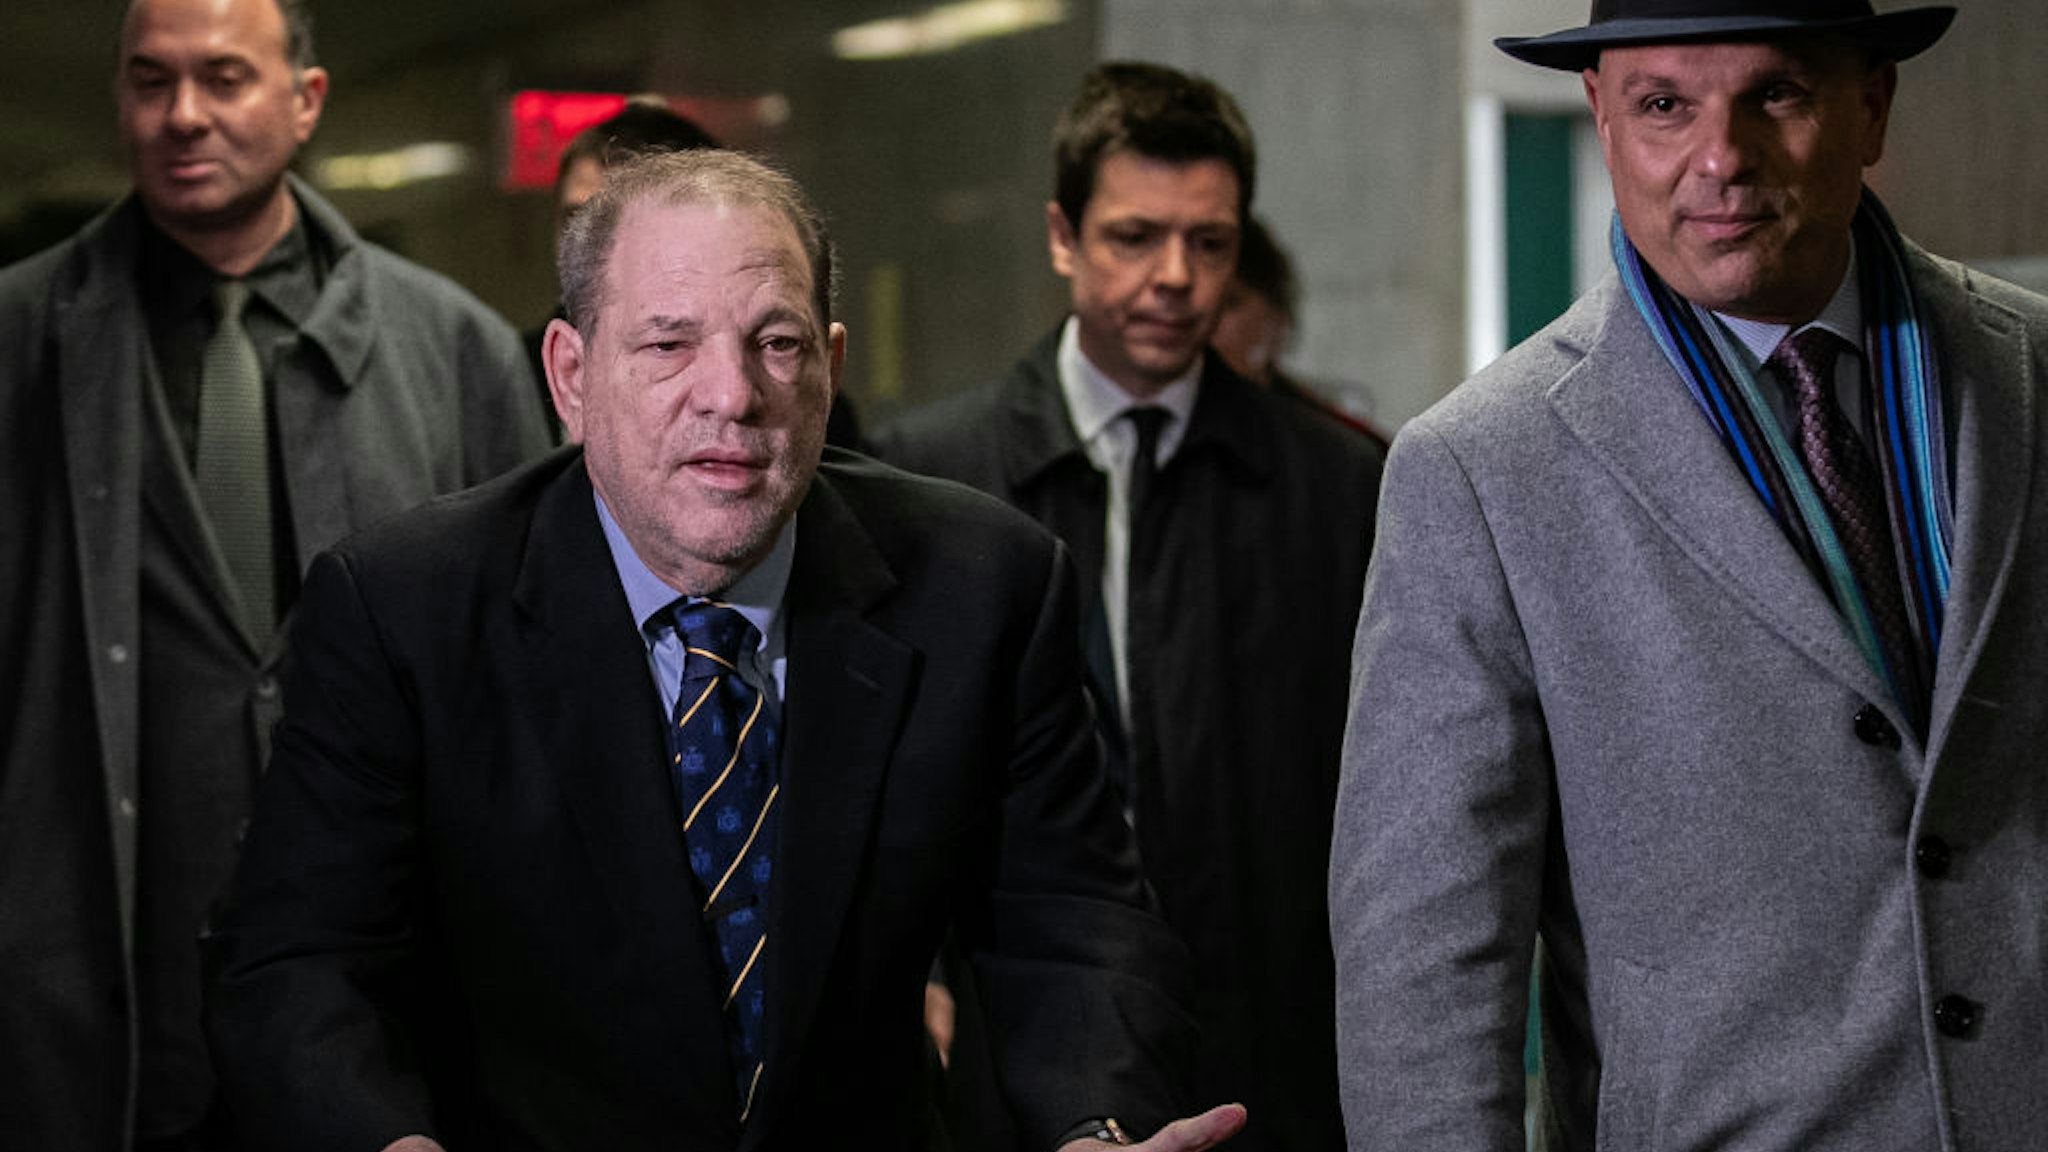 Harvey Weinstein arrives at New York City Criminal Court for the continuation of this trial on January 24, 2020 in New York City. Weinstein, a movie producer whose alleged sexual misconduct helped spark the #MeToo movement, pleaded not-guilty on five counts of rape and sexual assault against two unnamed women and faces a possible life sentence in prison. (Photo by Jeenah Moon/Getty Images)